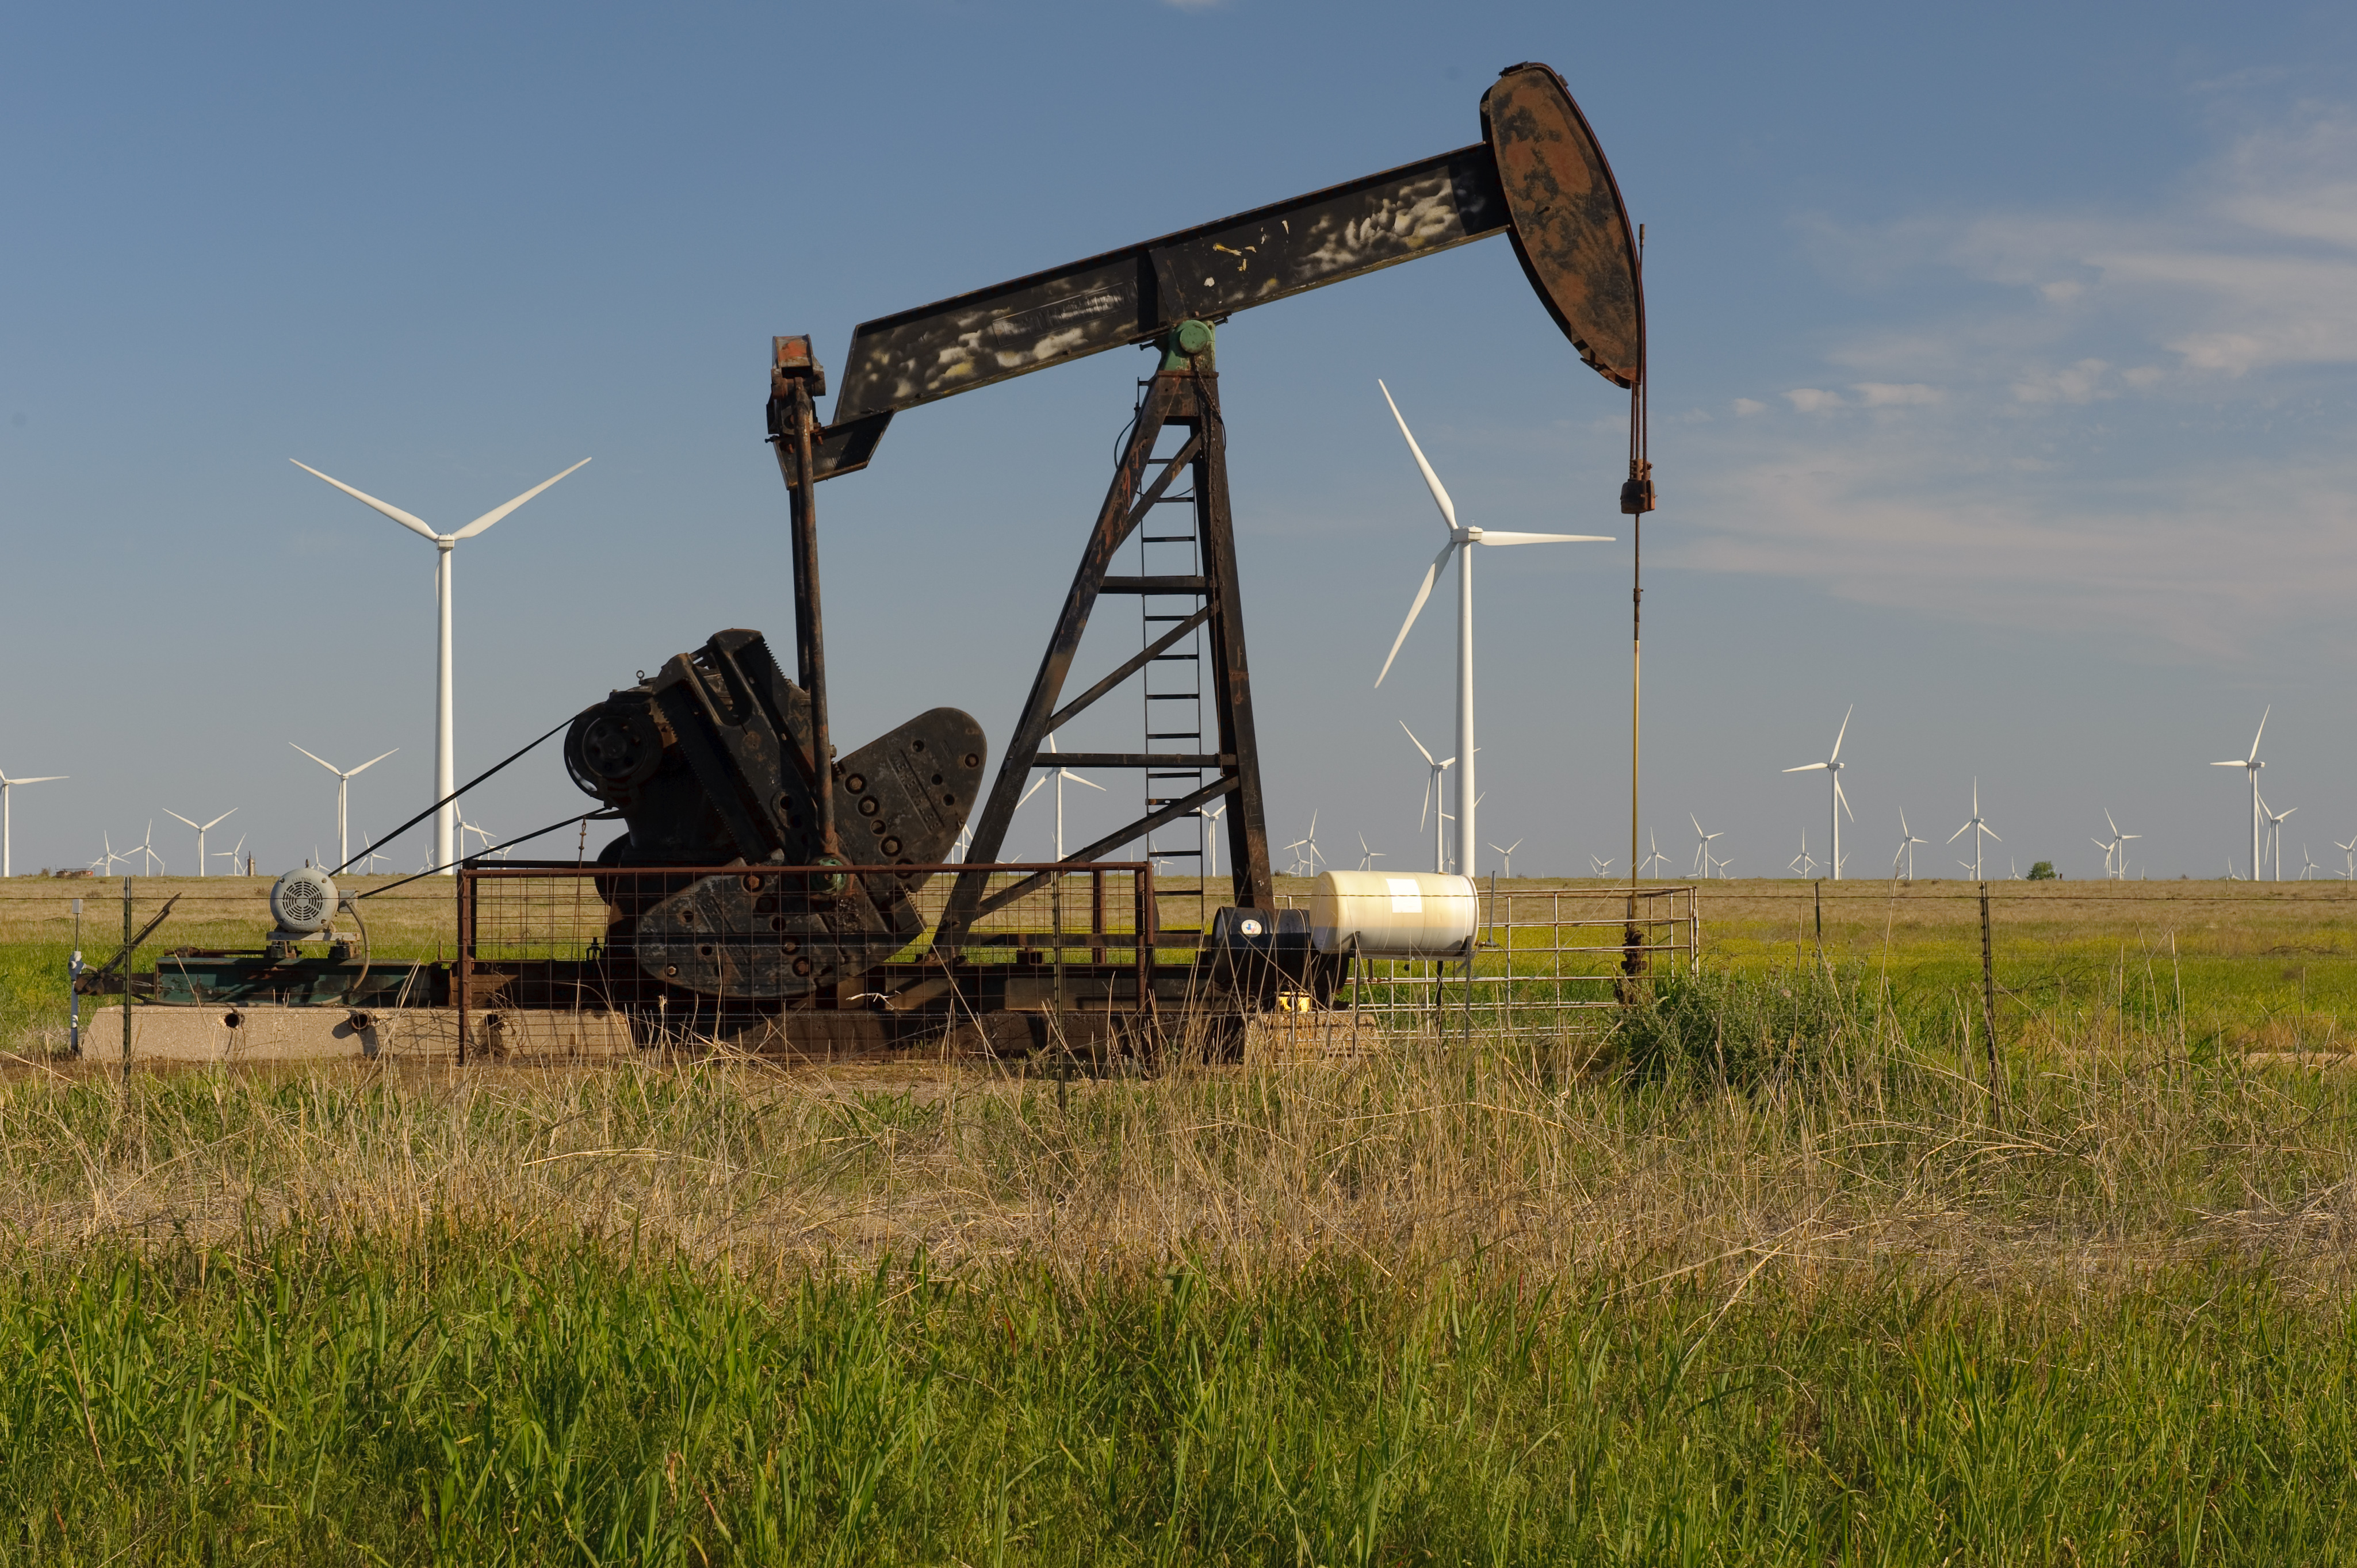 beth silvers recommends West Texas Pump Jack